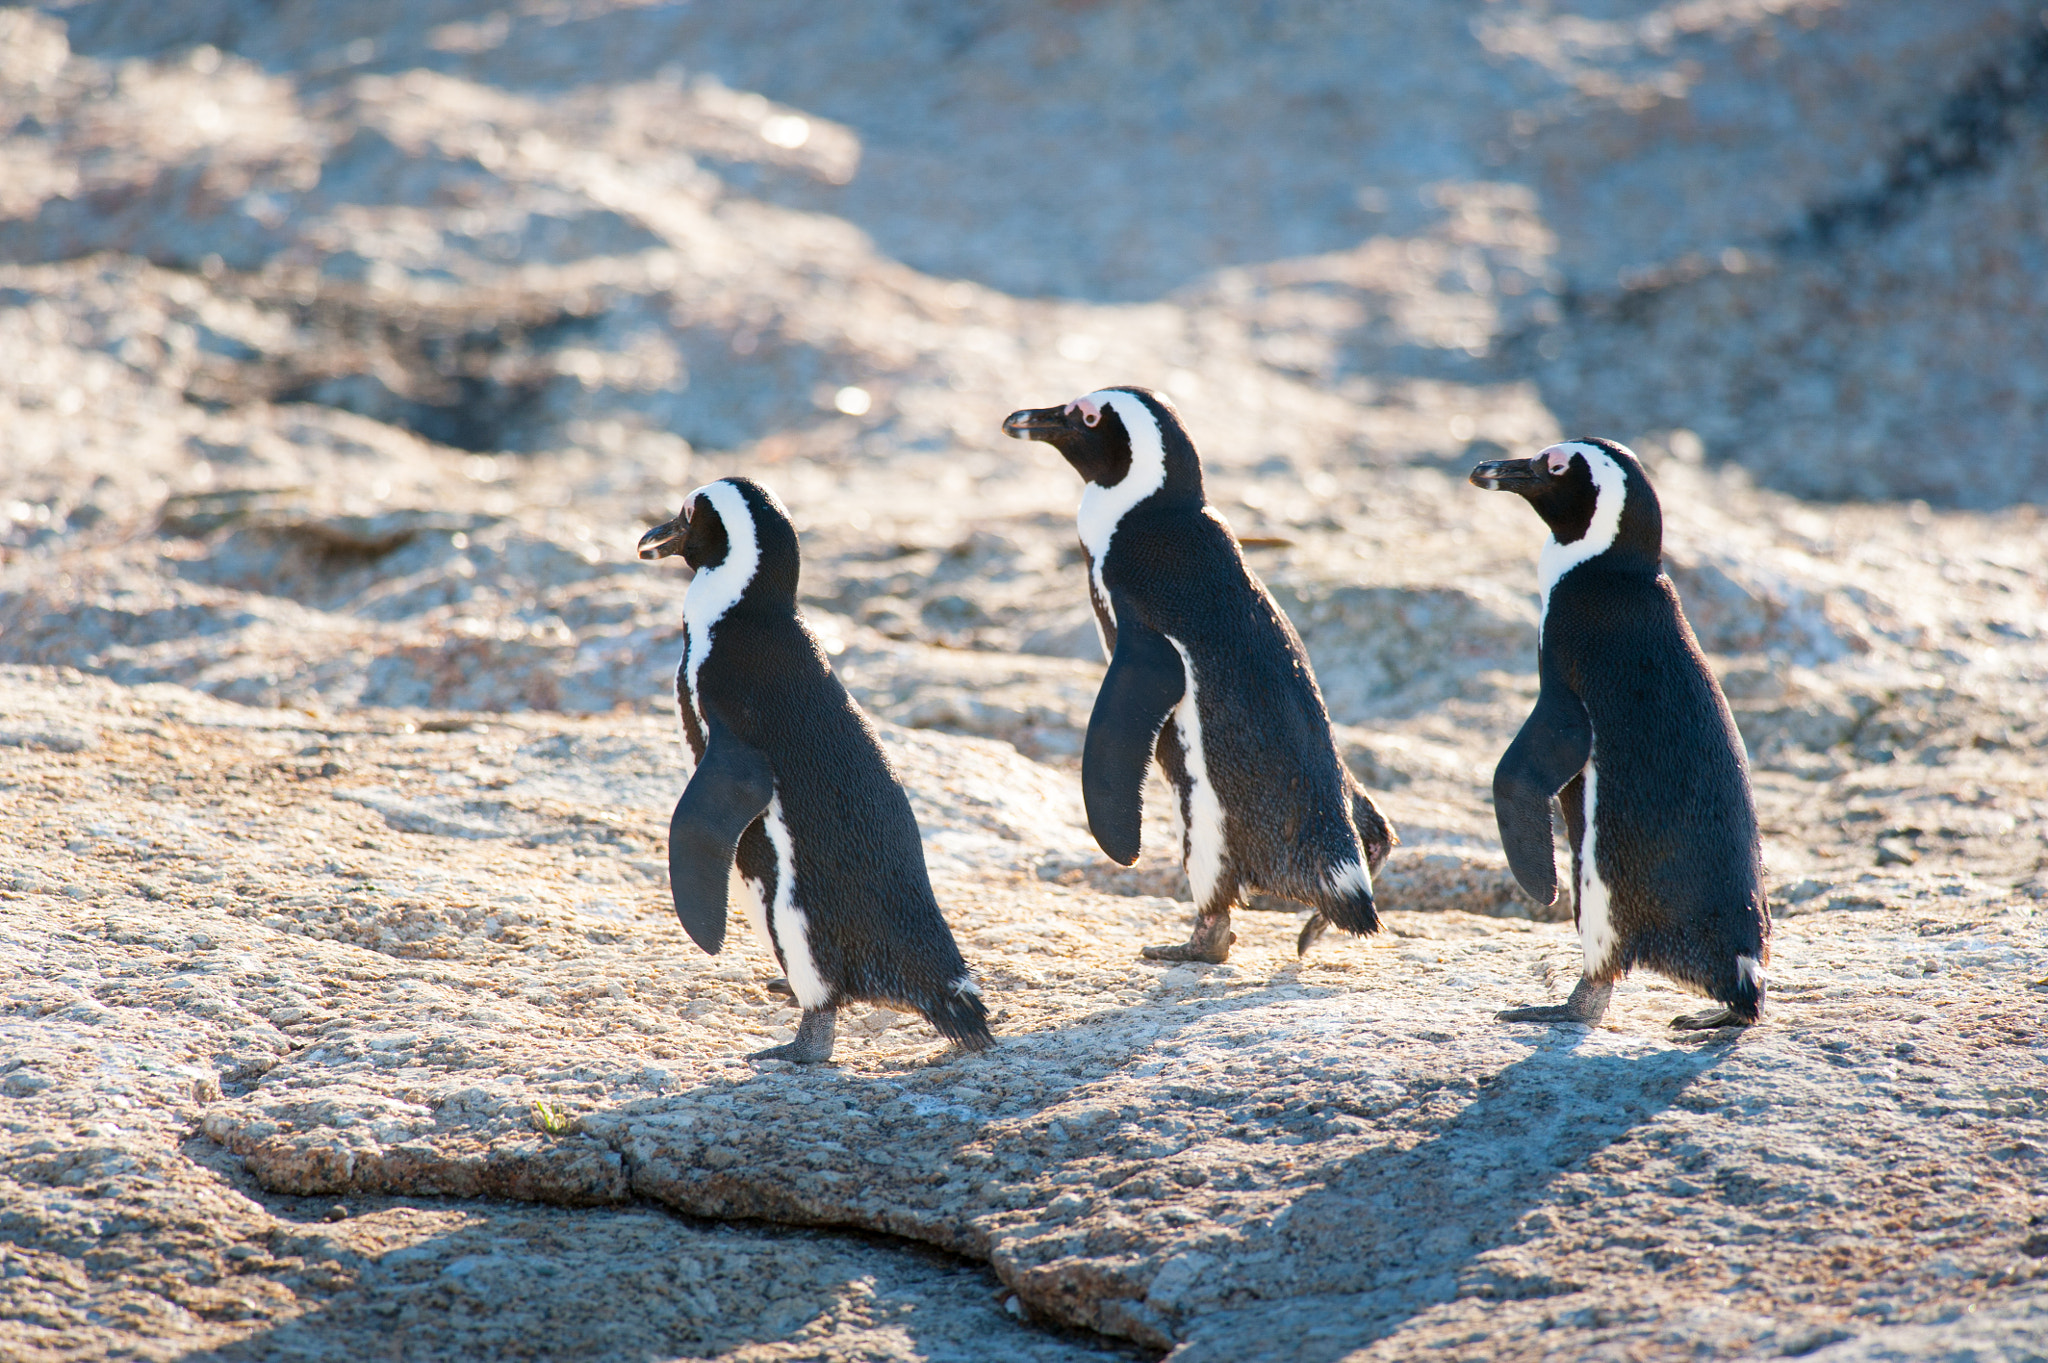 Nikon D700 sample photo. Three penguins marching on a rock photography